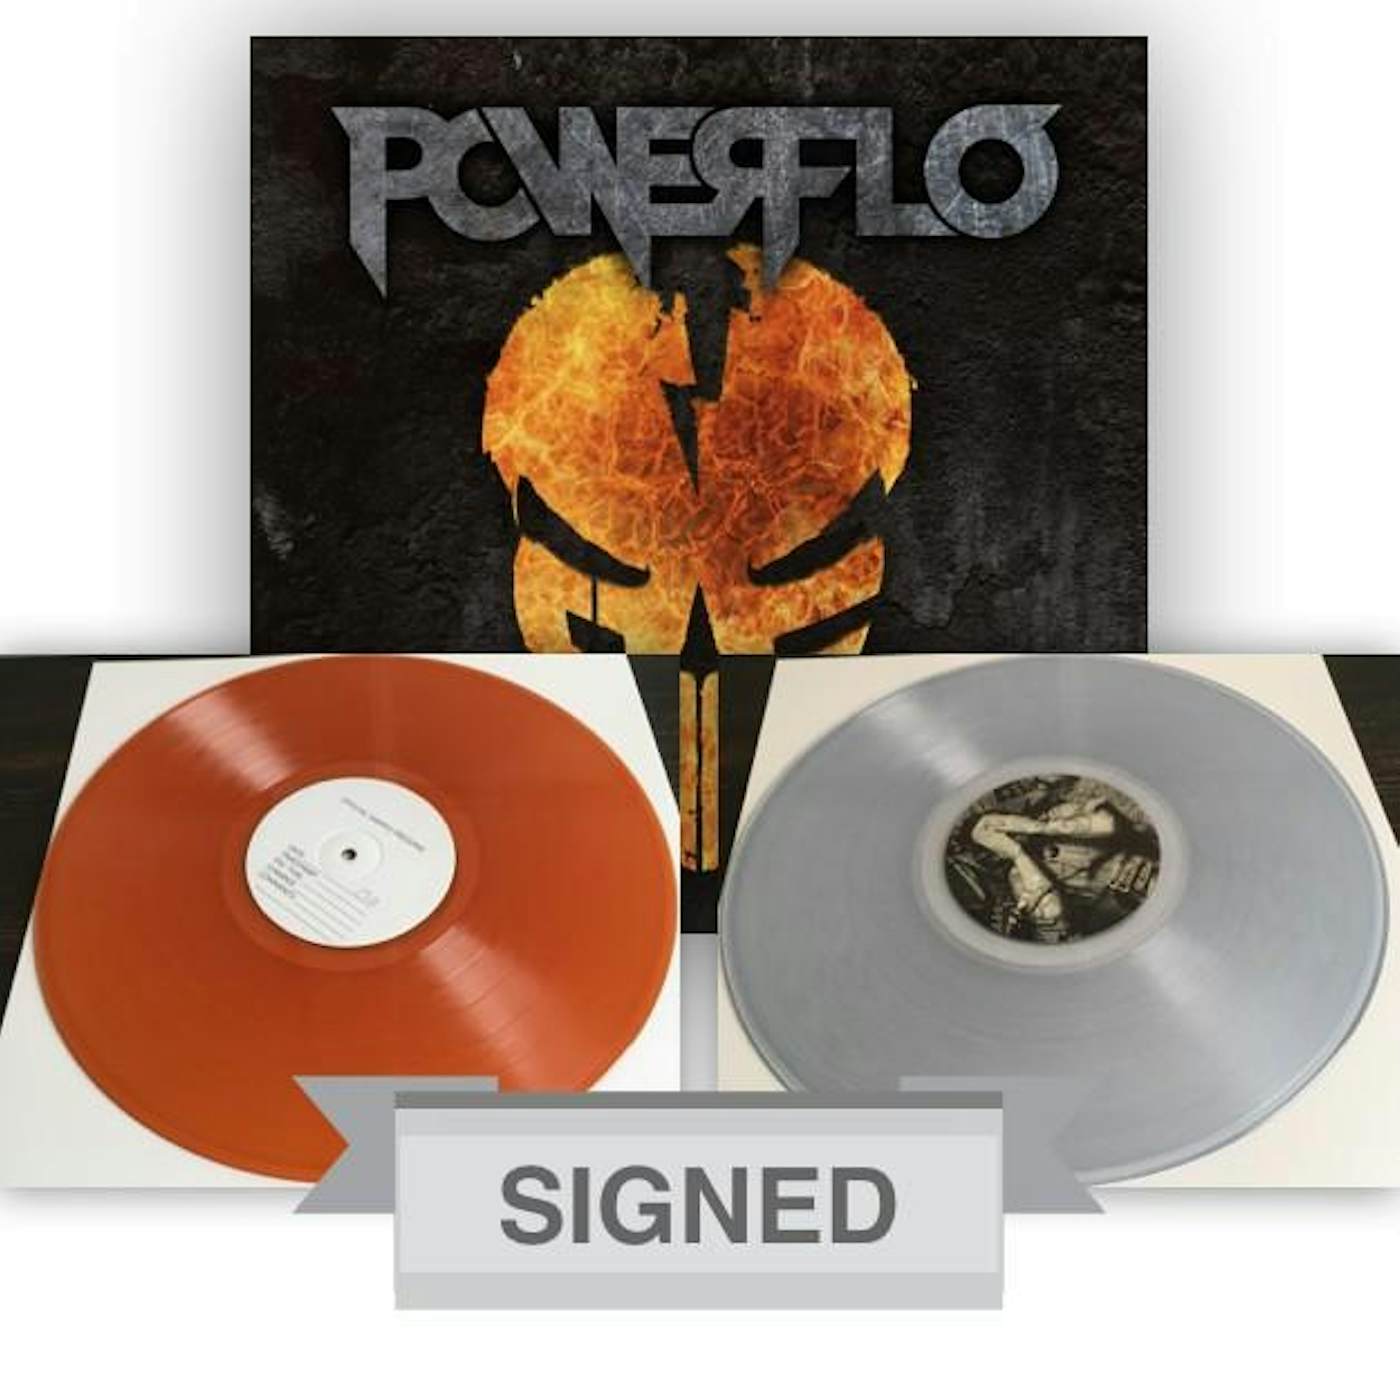 Powerflo - Signed Limited Edition Clear or Colored Vinyl